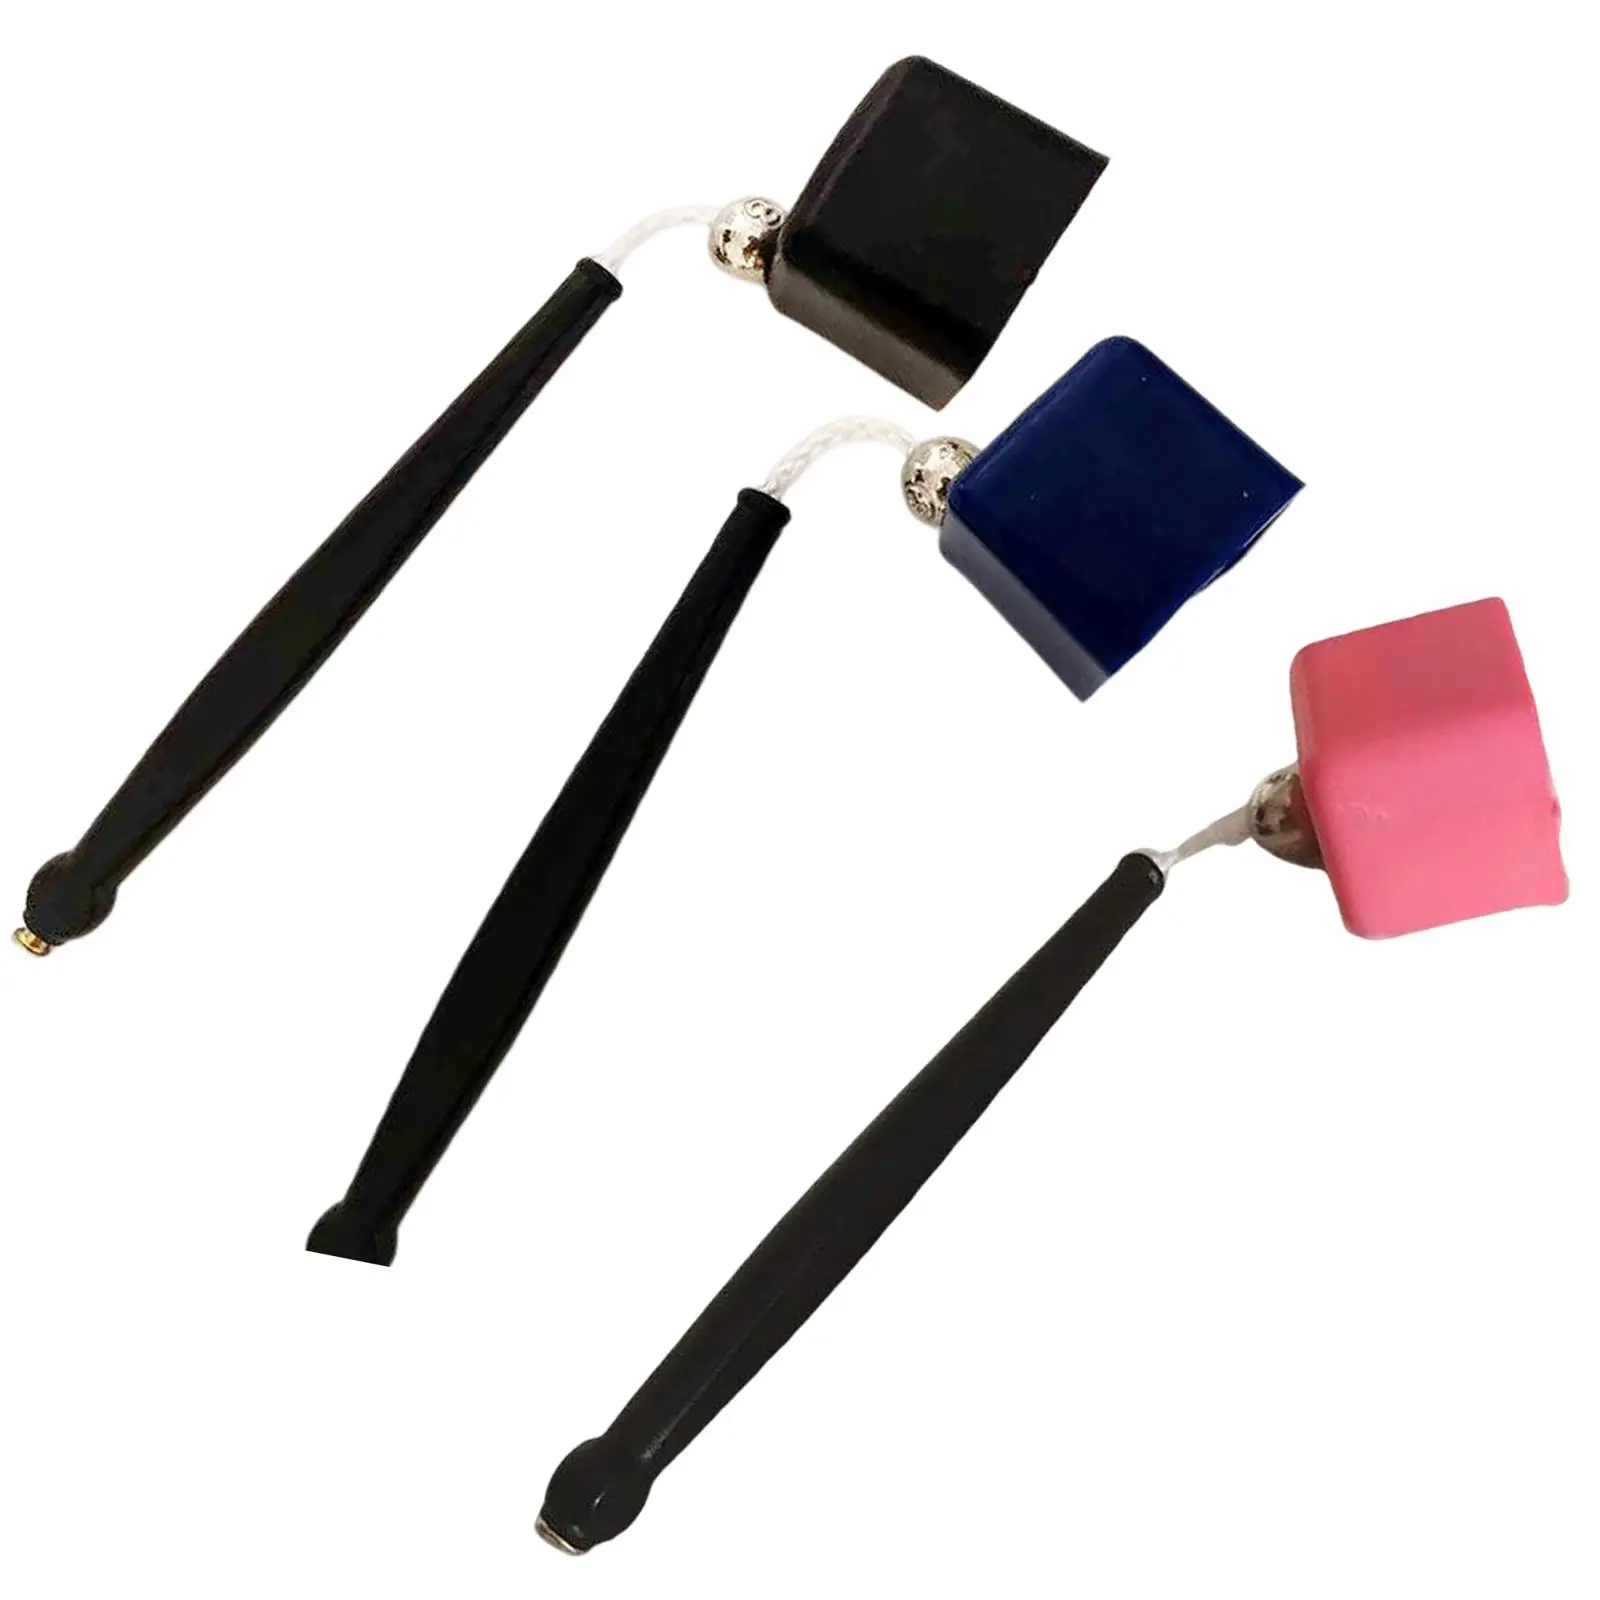 Billiards Pool Cue Chalk Holder Pool Table Accessories Easy to Carry Hang Clamp